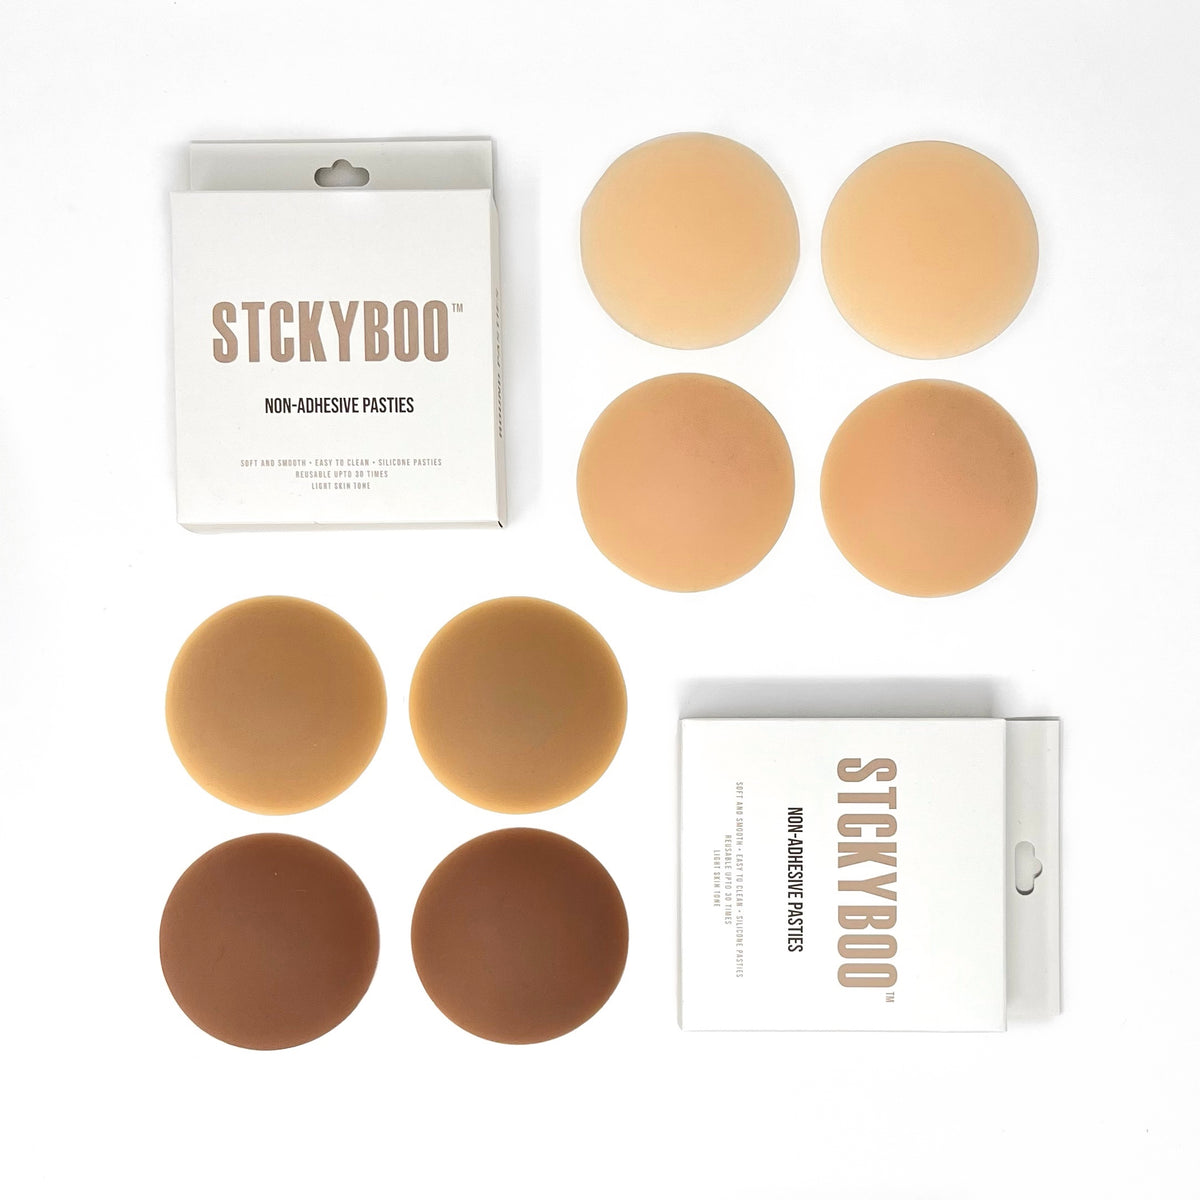 STCKYBOO  Reusable Non-Adhesive Pasties